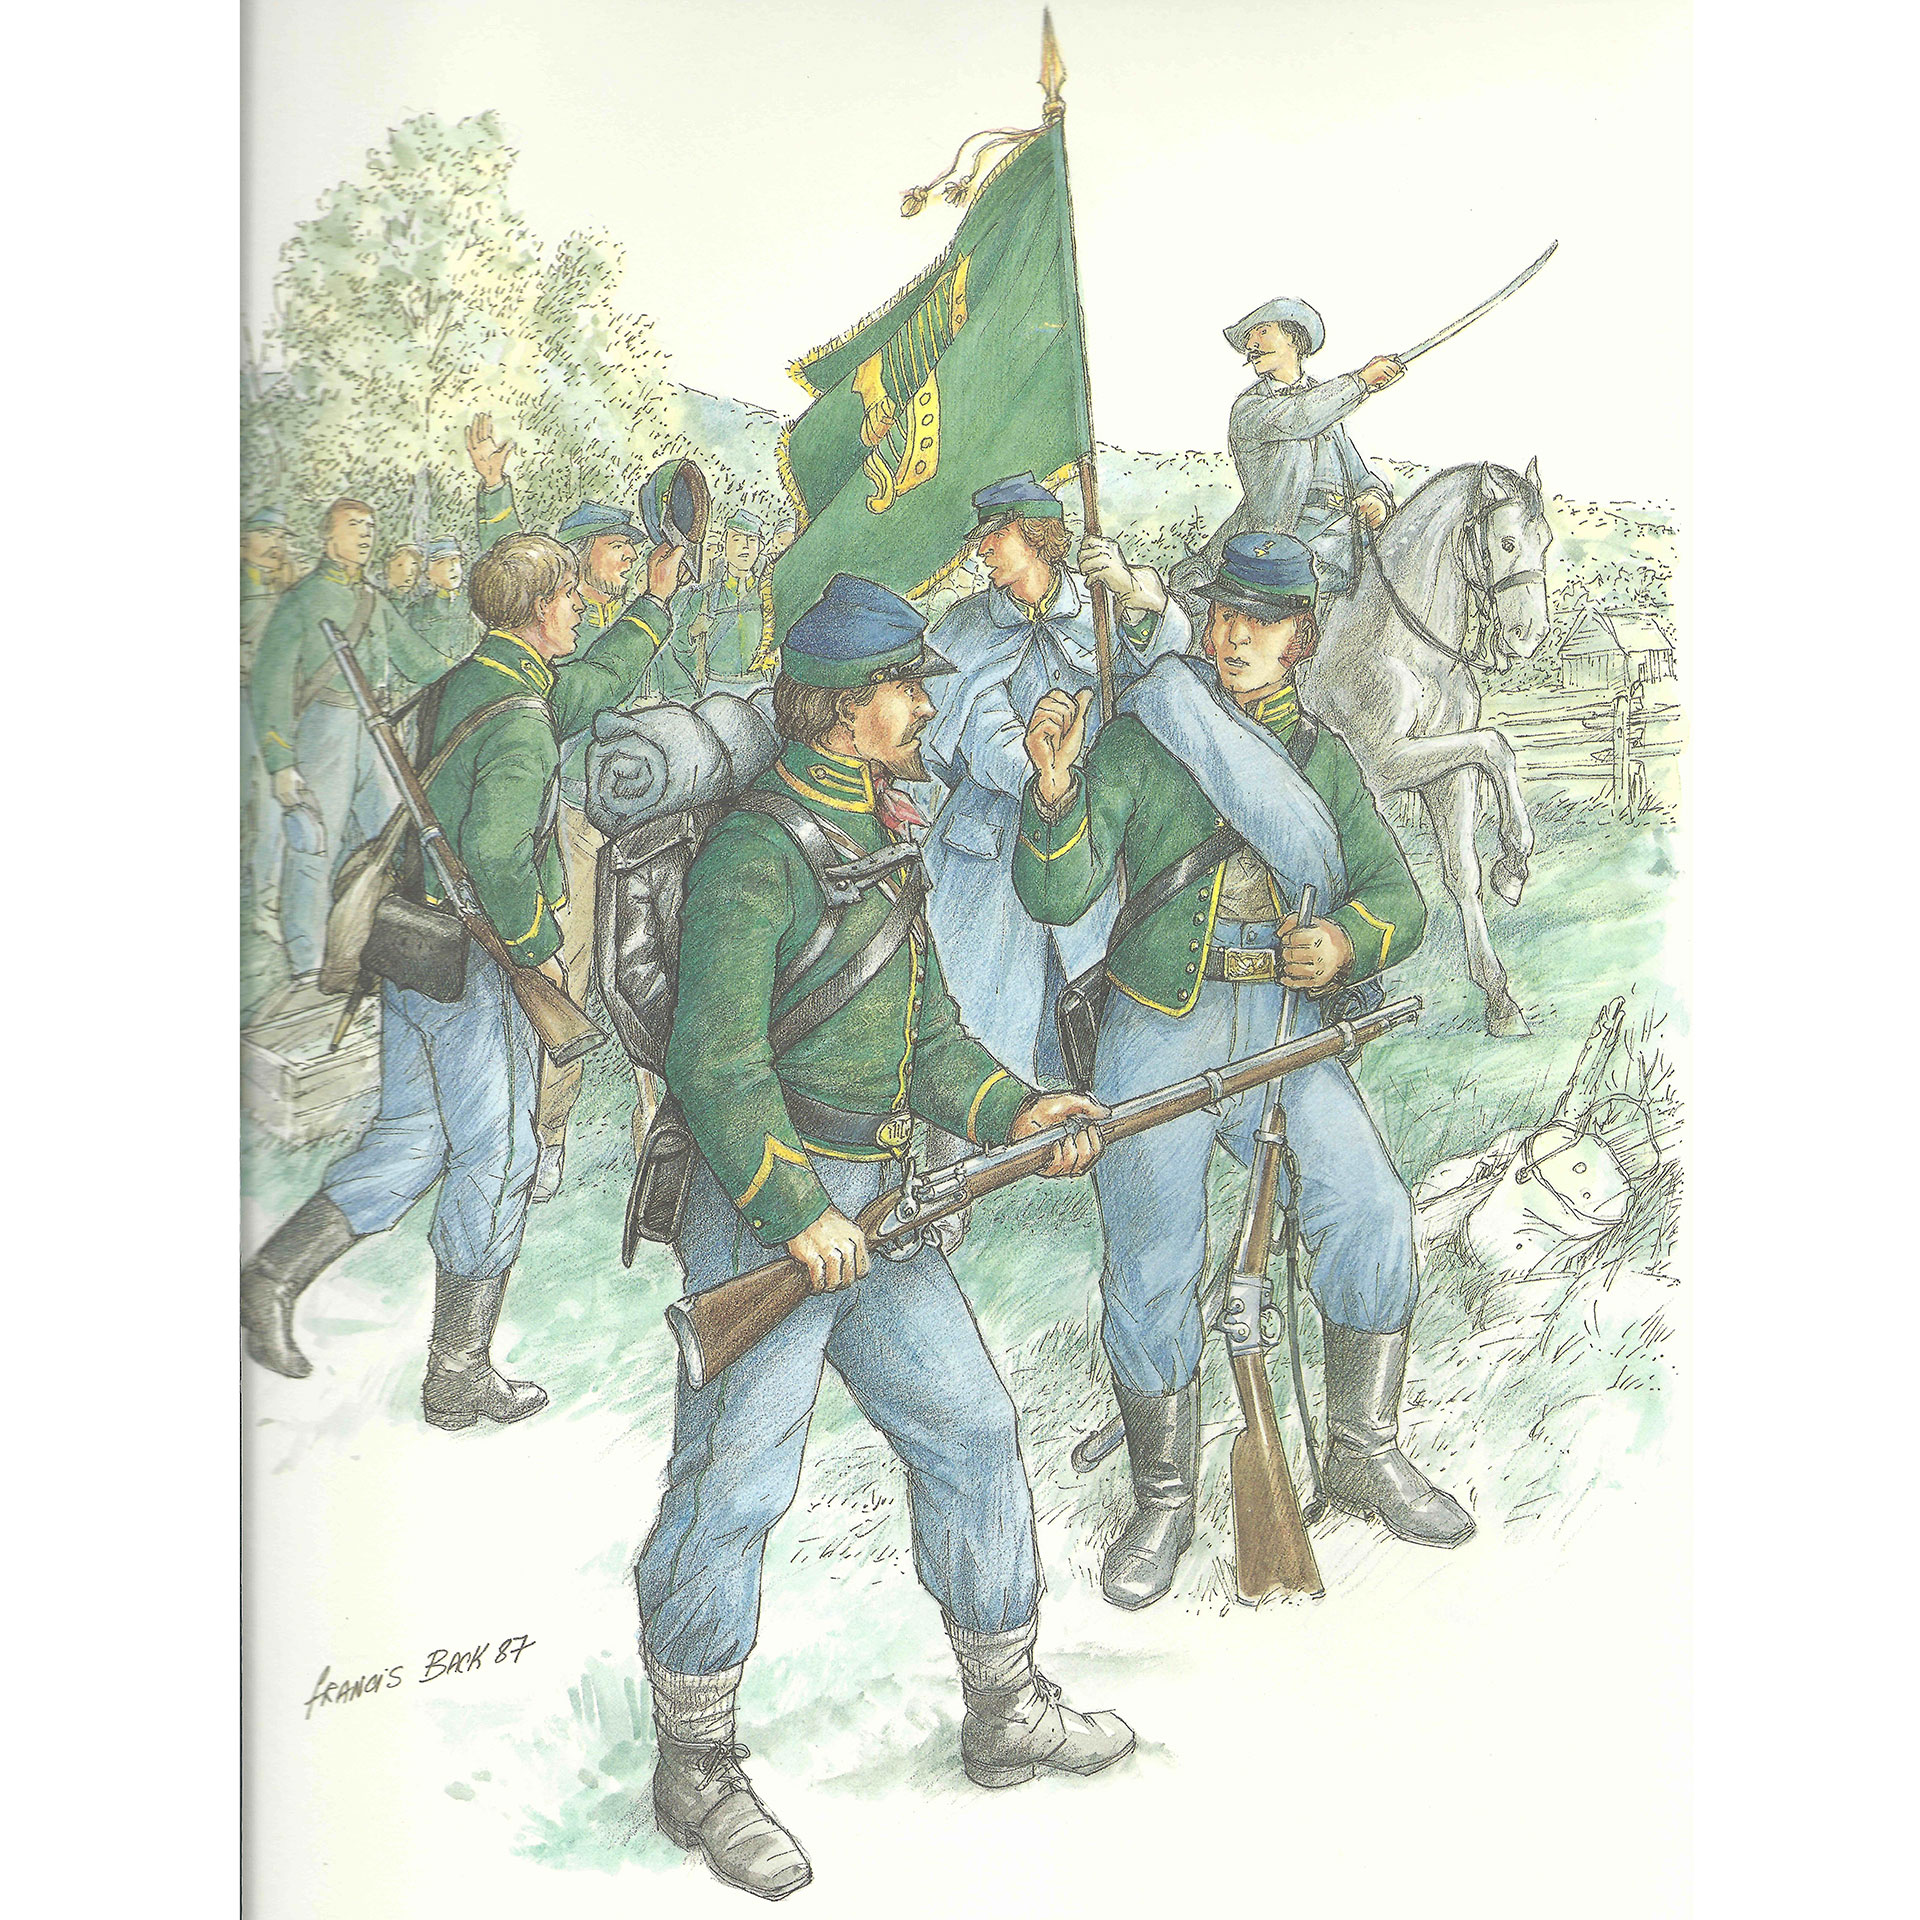 When the Fenians tried to attack Canada in a second major invasion in 1870, many of them were now armed with Needham Conversion Rifles. The rifles were used at the battles of Eccles Hill in Vermont, and Trout River on the New York border. Courtesy of the Company of Military Historians.